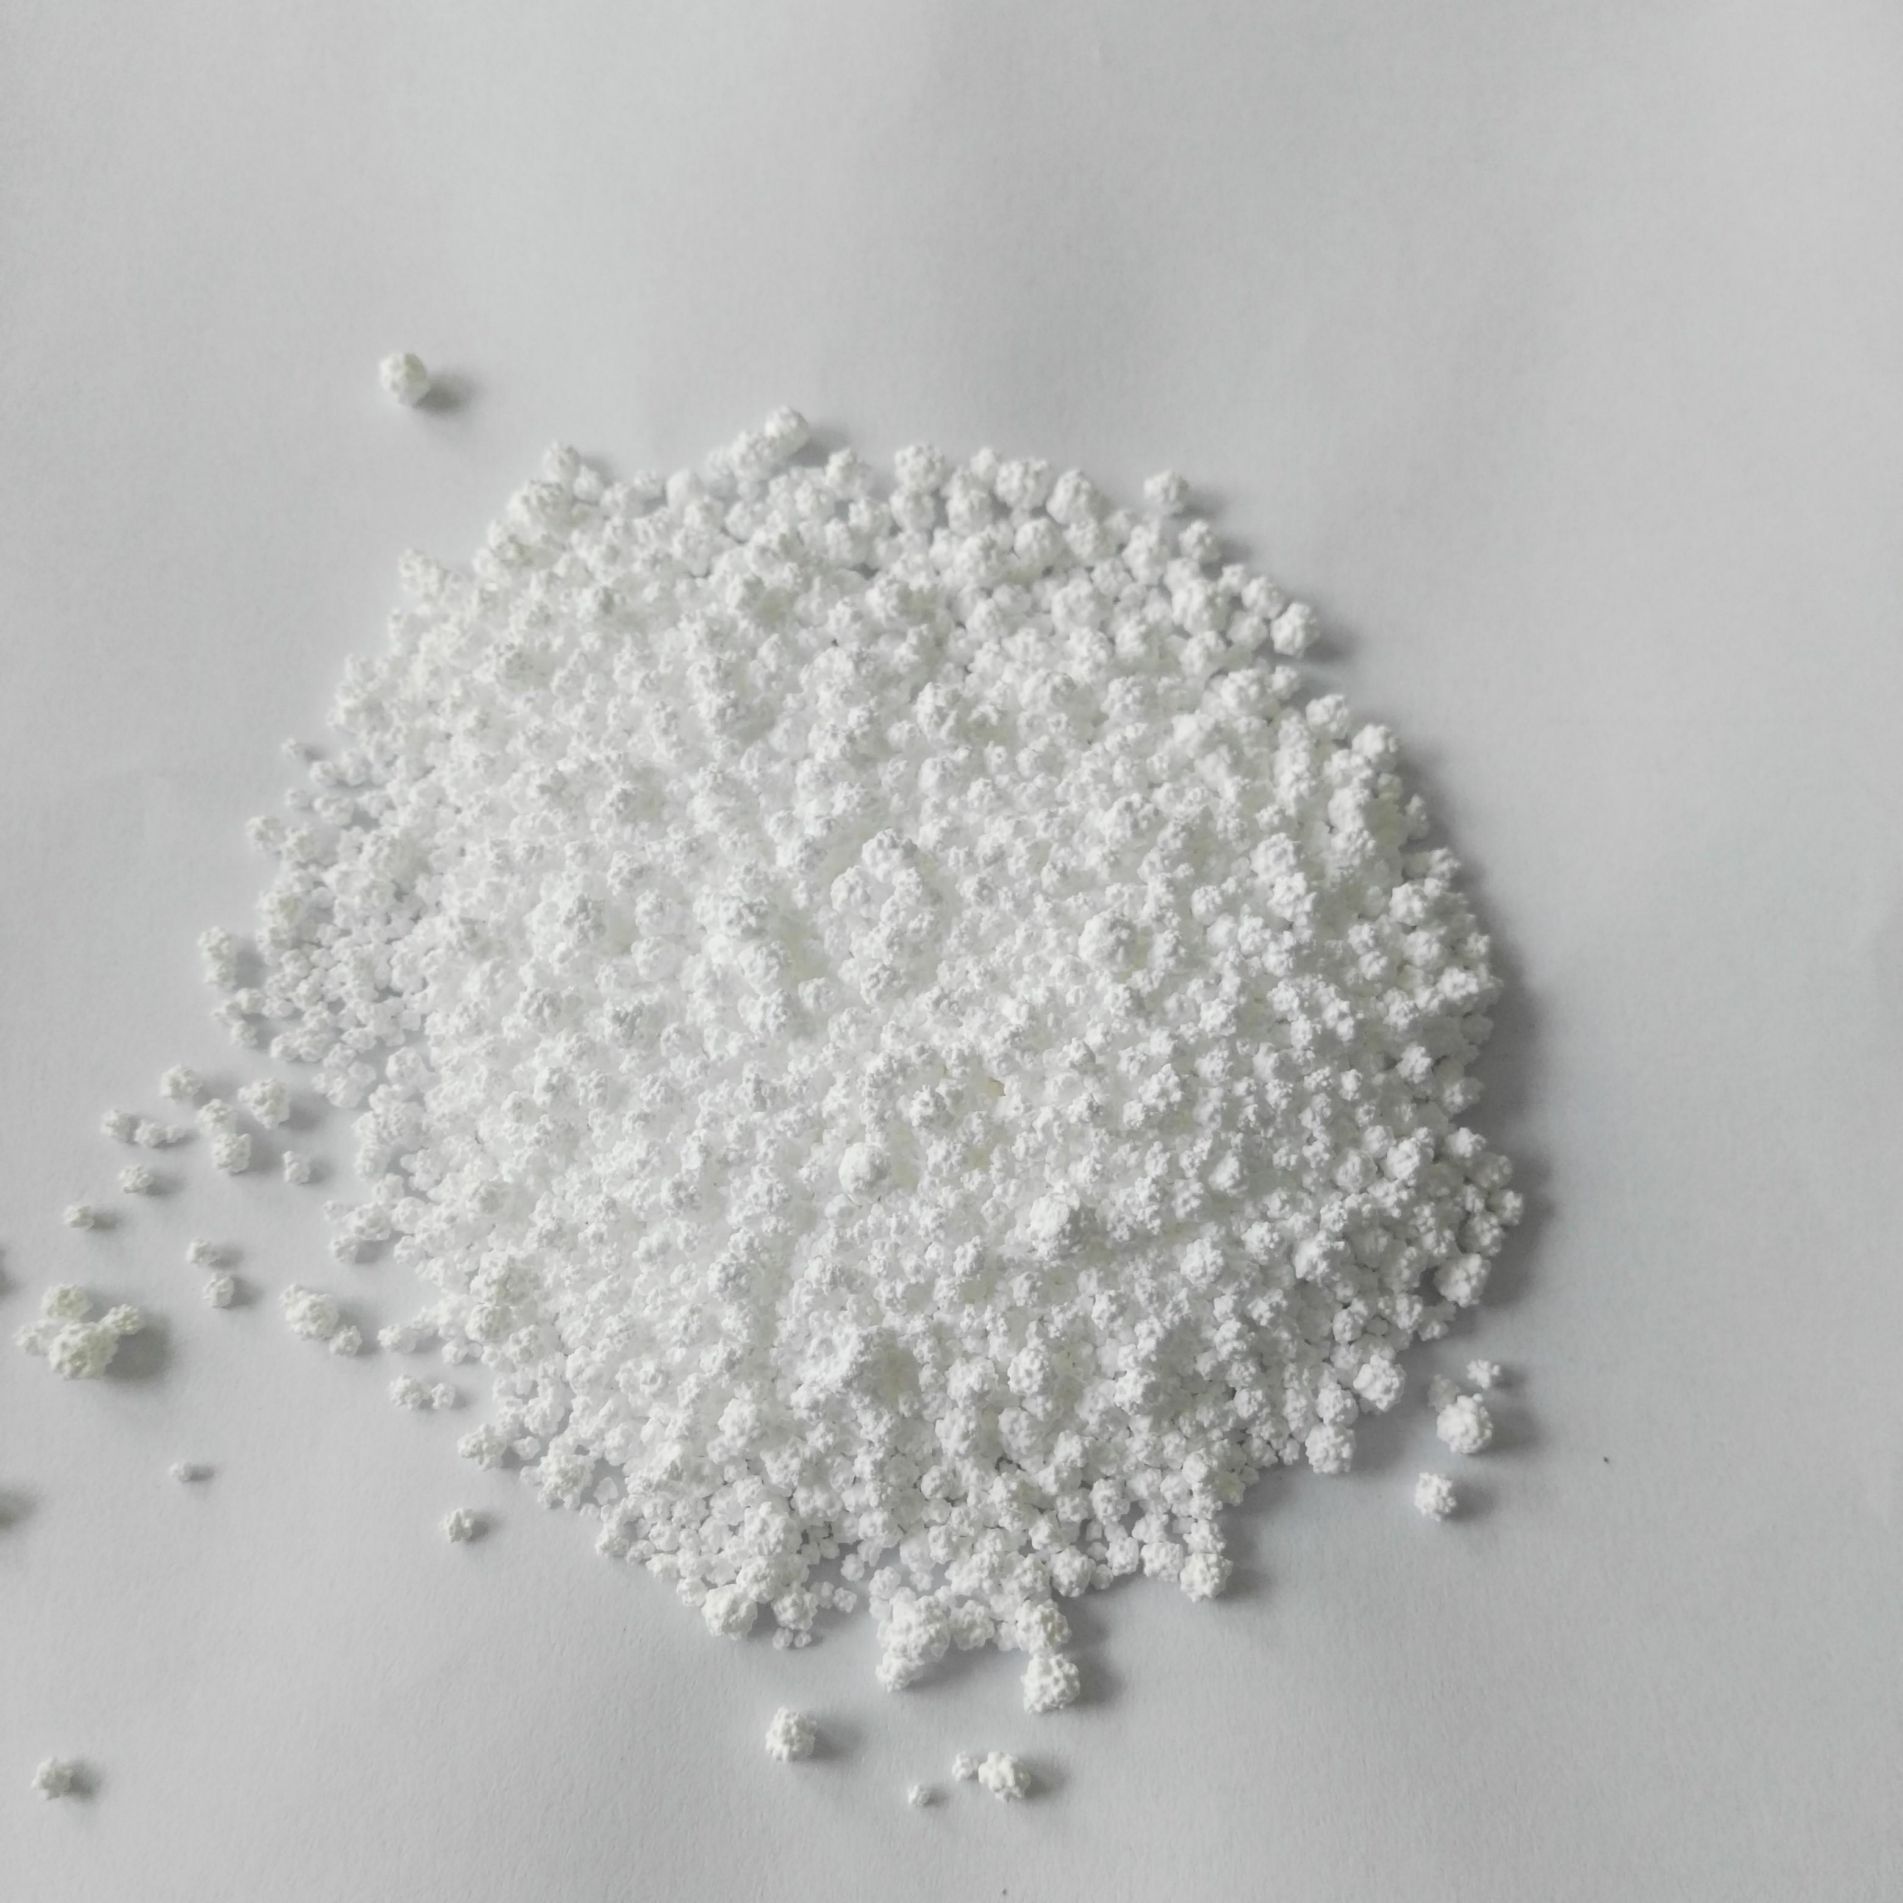 Calcium Chloride Anhydrous For Industry